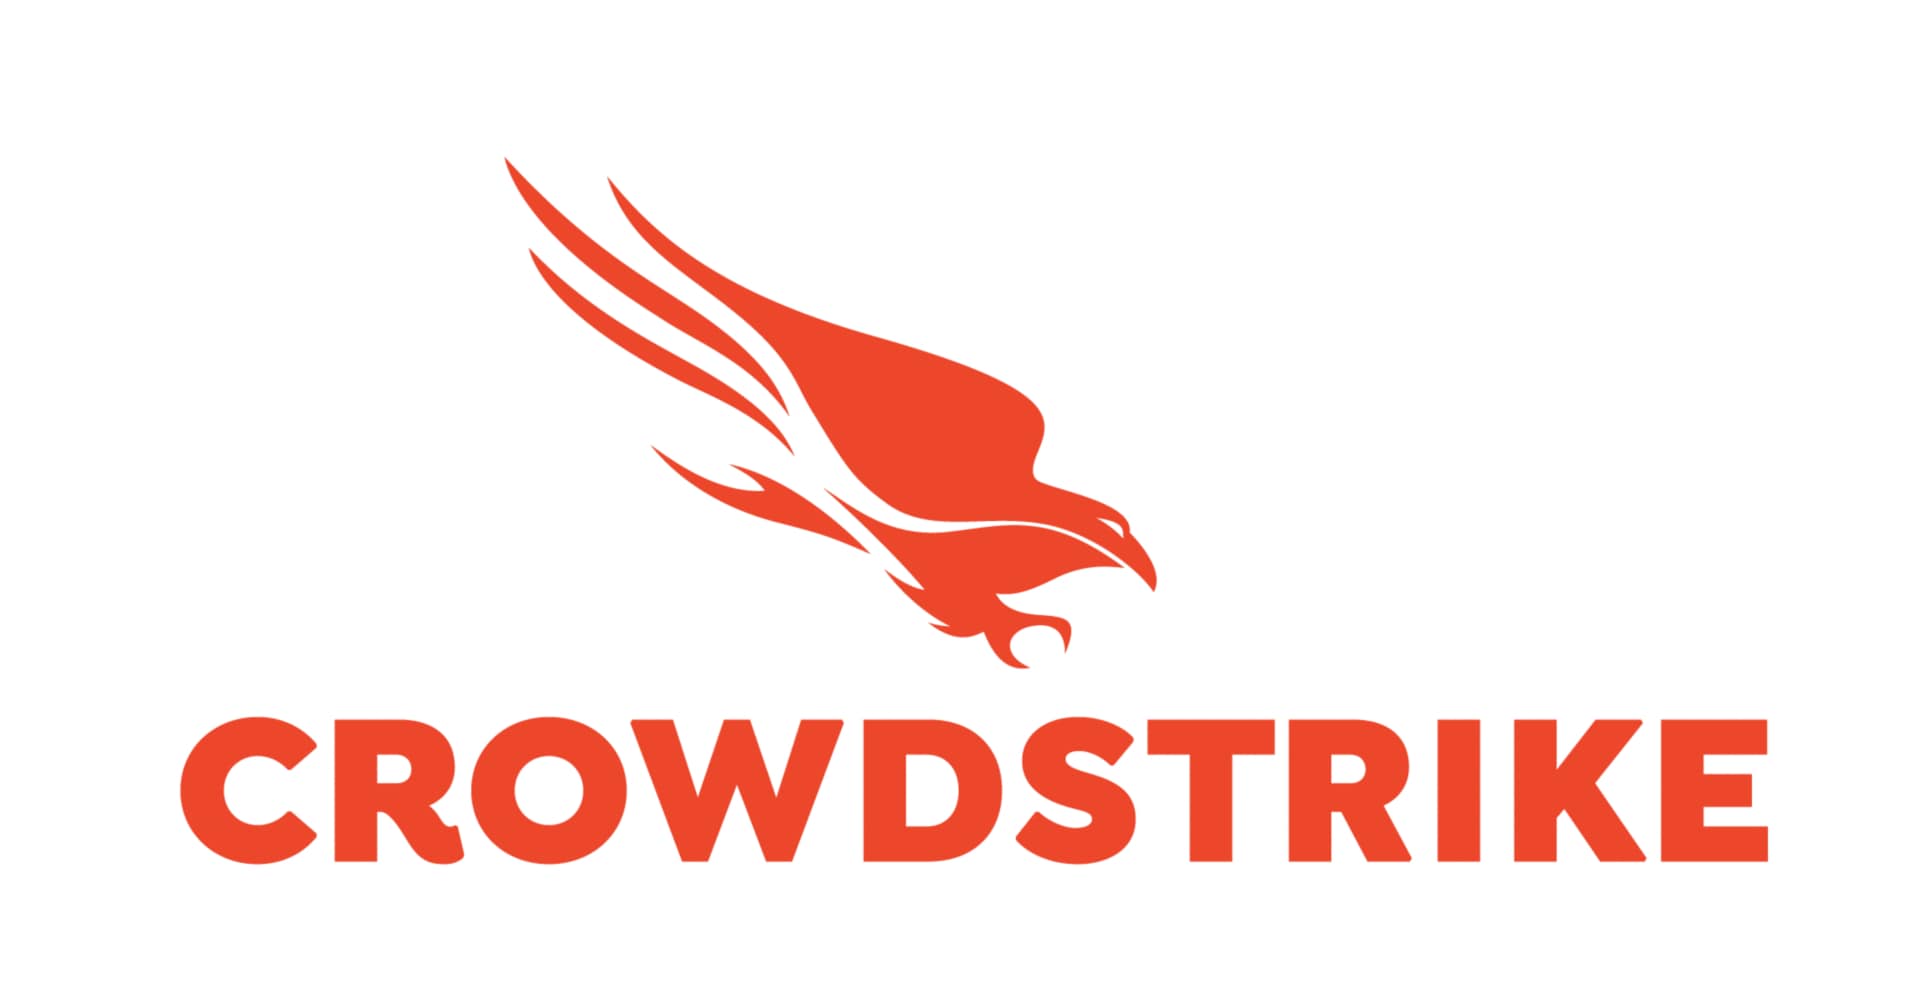 CrowdStrike Falcon Cloud Security Complete Upgrade Software Subscription